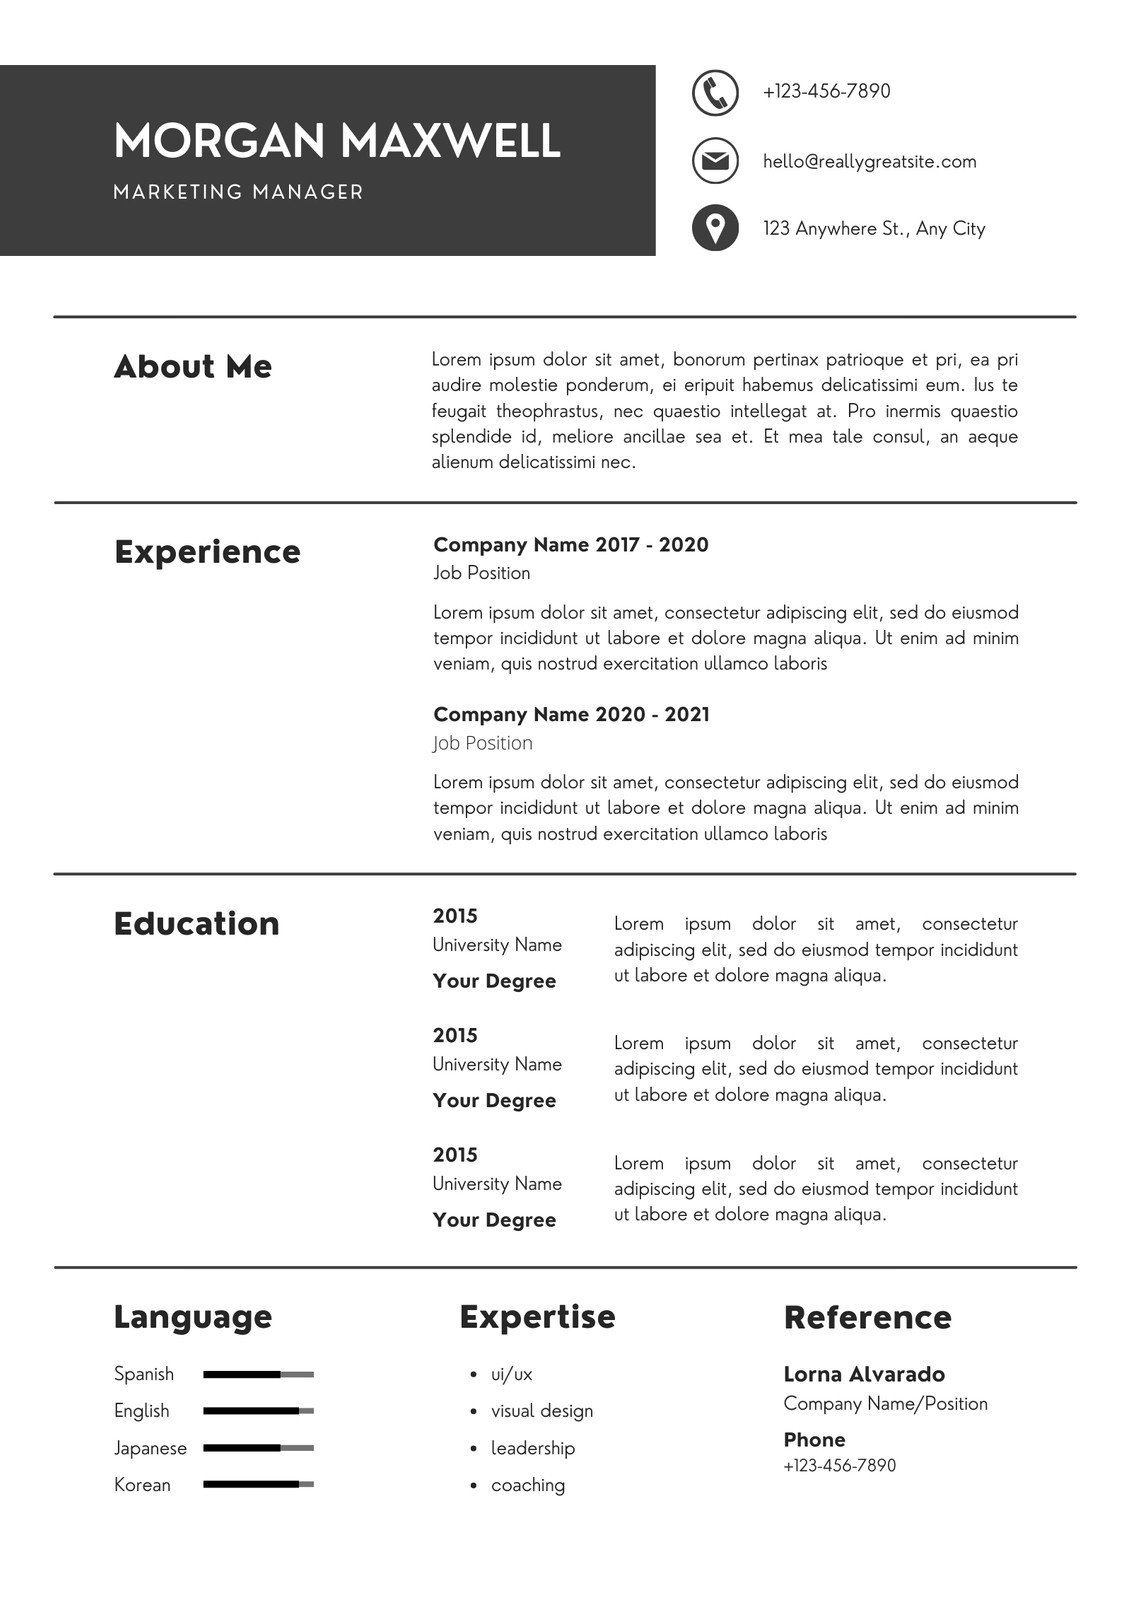 Free Online Resume Builder | Easily create standout resumes